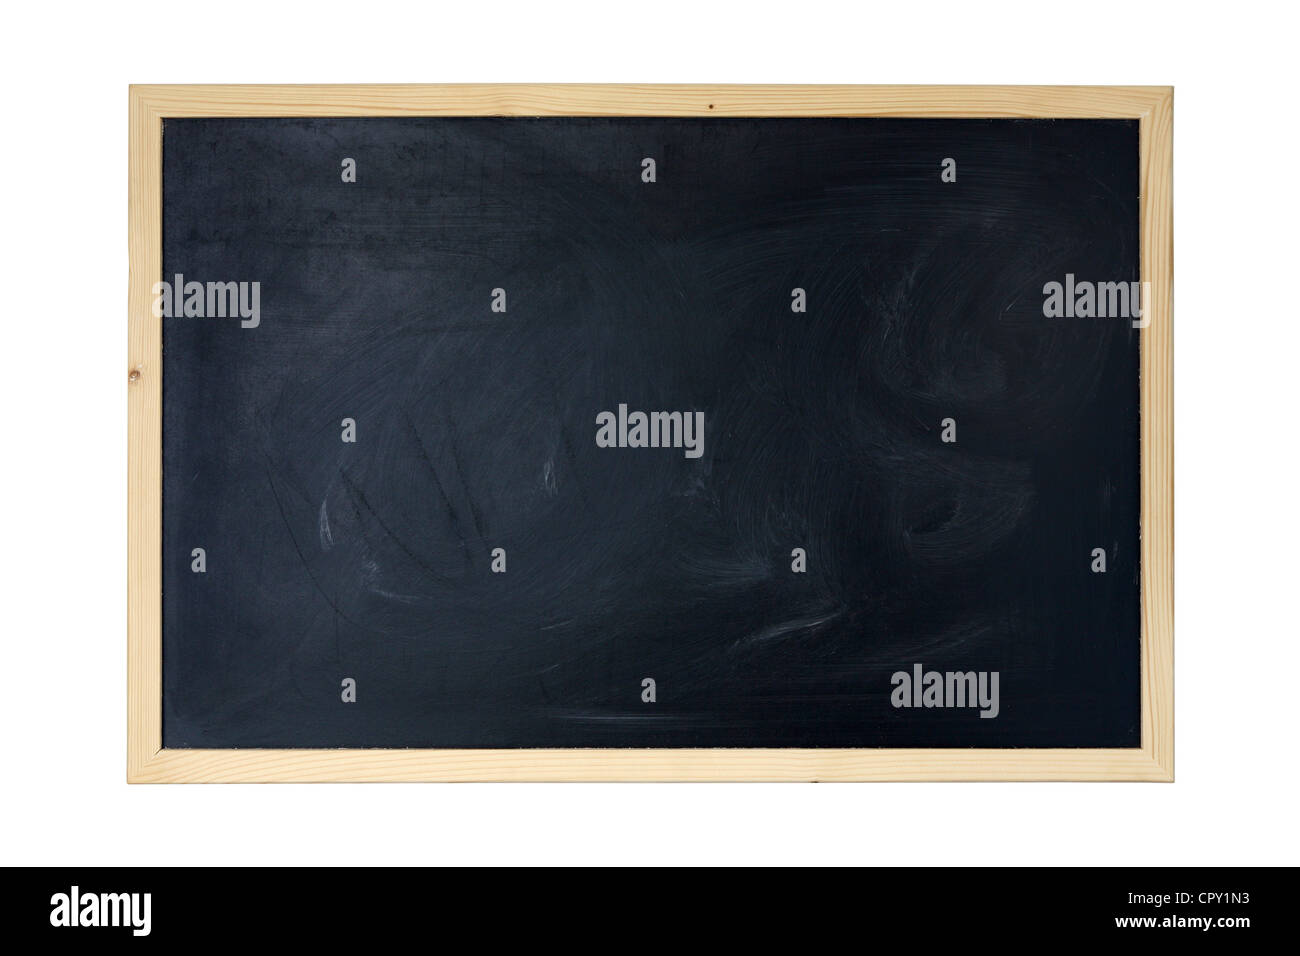 Black board with a wooden frame Stock Photo